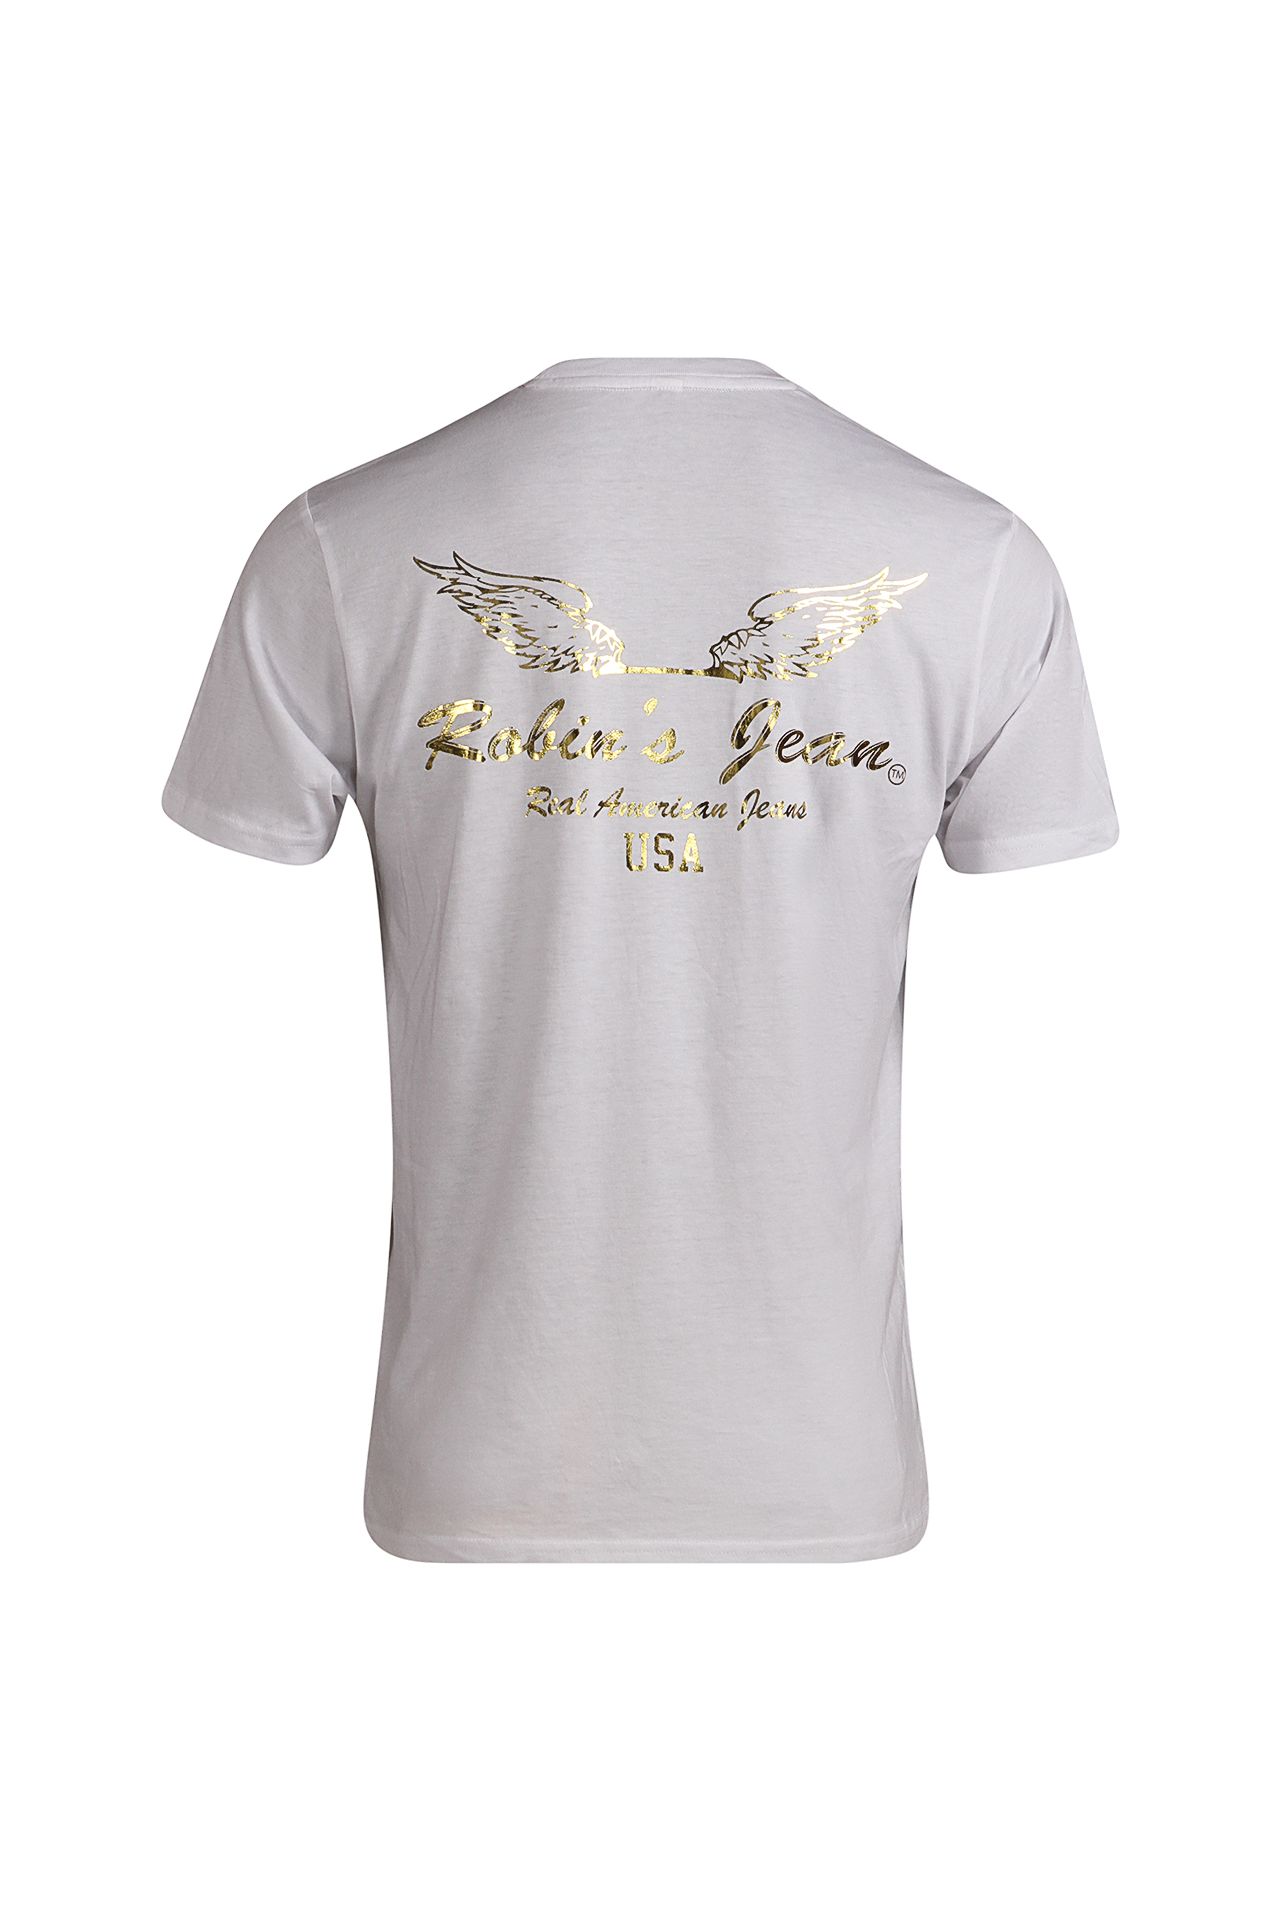 ROBIN WINGS TEE IN WHITE GOLD